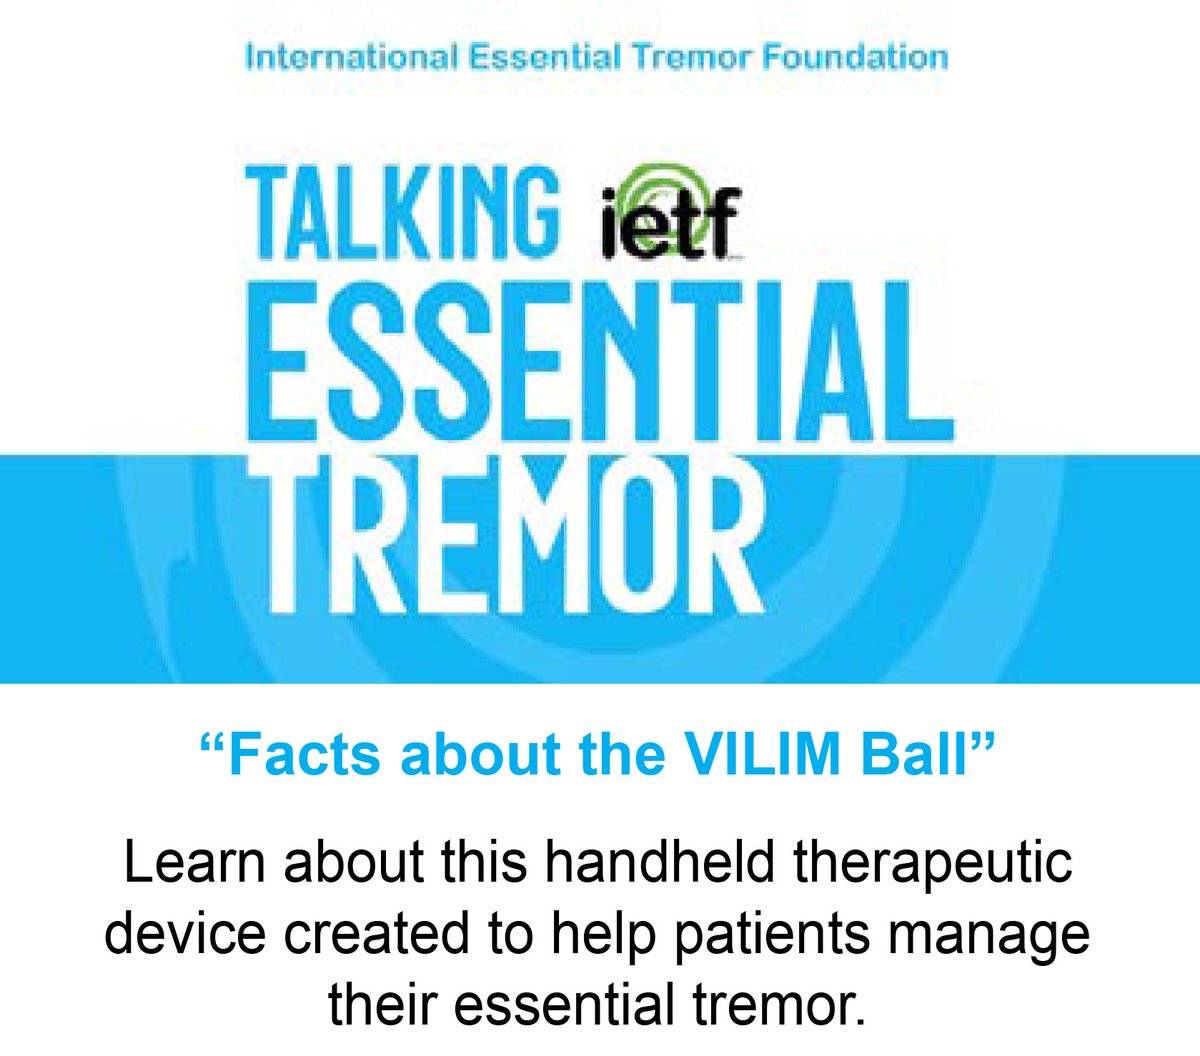 VILIM ball is a handheld therapeutic device that provides neuromodulation therapy to temporarily reduce hand tremor for patients with essential tremor. This is a conversation with creator Dr. Mantas Venslauskas, CEO of the Lithuanian-based company Vilimed. essentialtremor.org/facts-about-th…